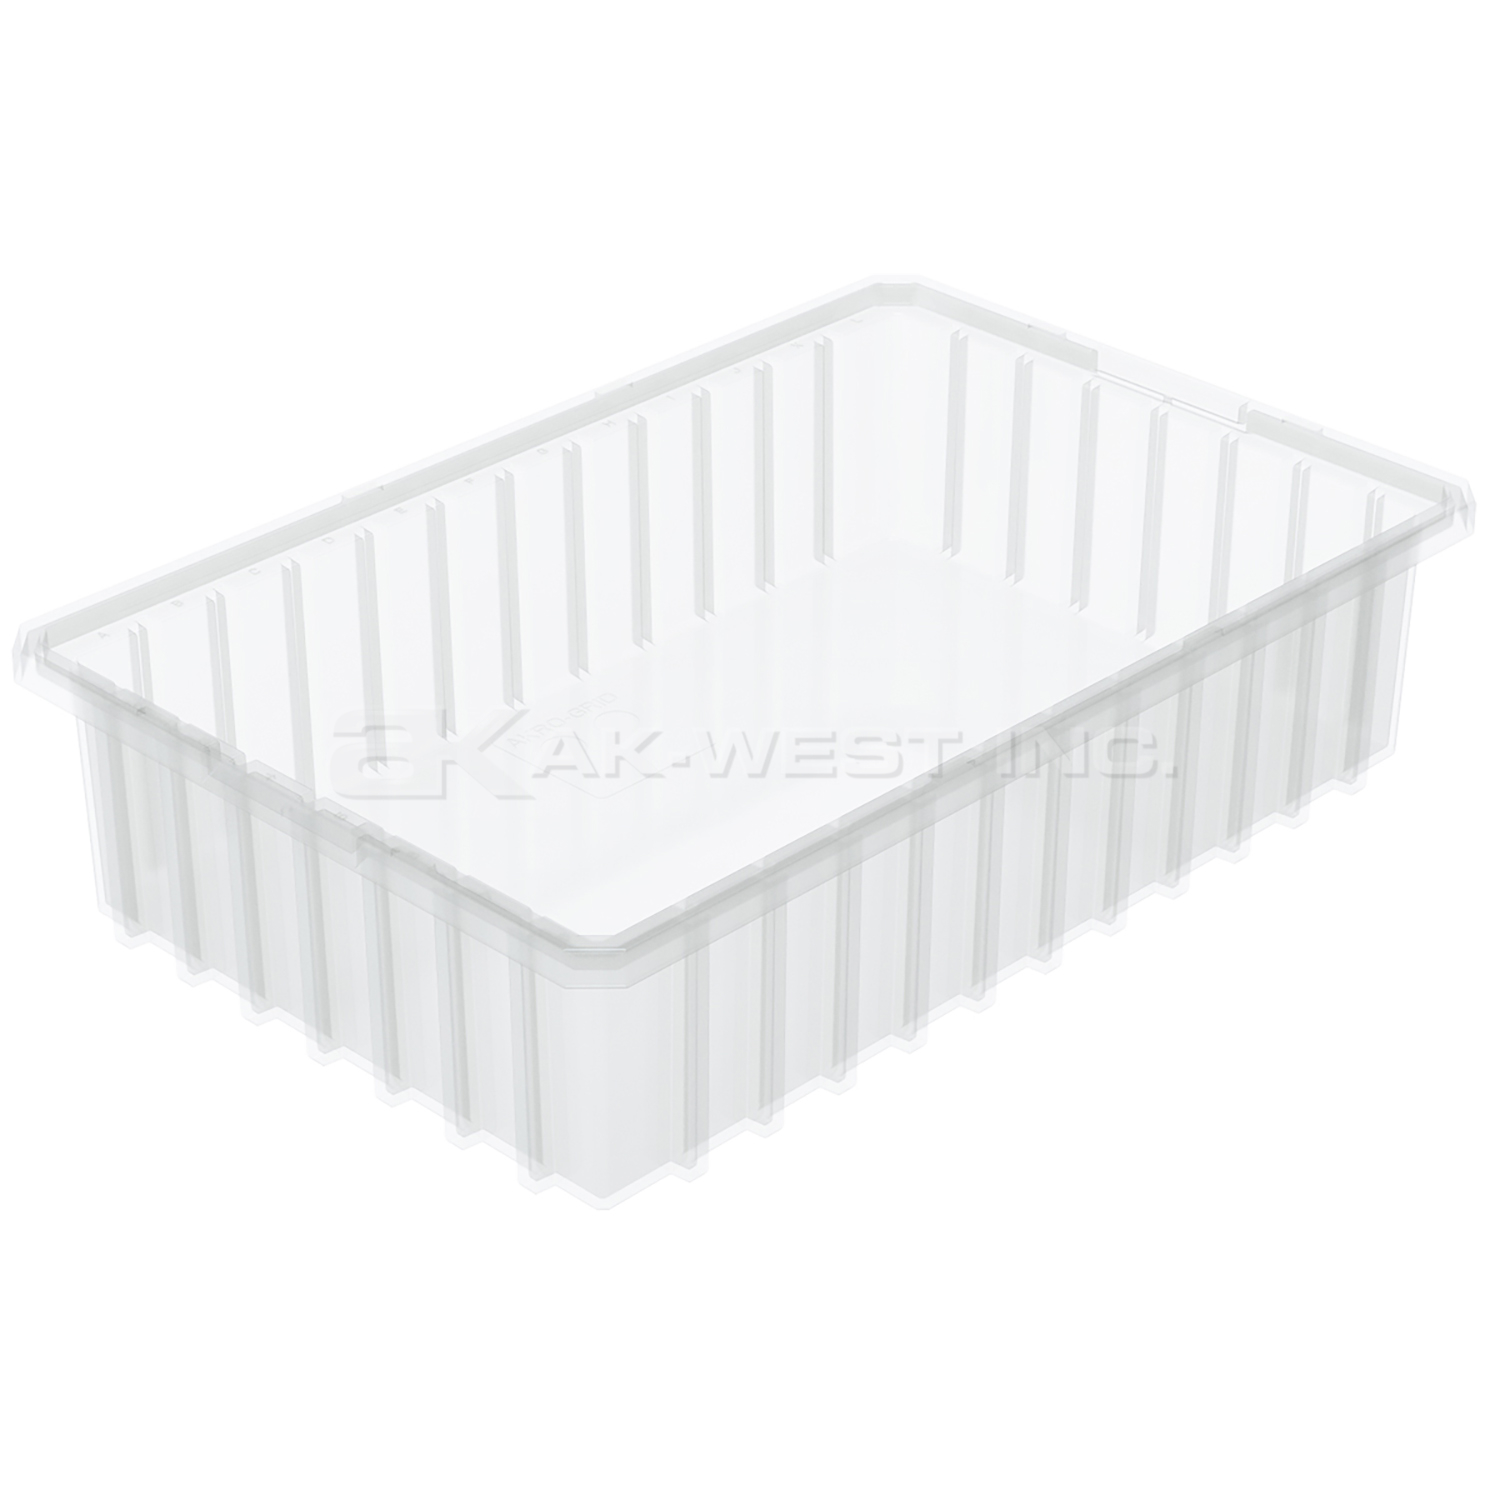 Clear, 16-1/2" x 10-7/8" x 4" Dividable Grid Container (12 Per Carton)